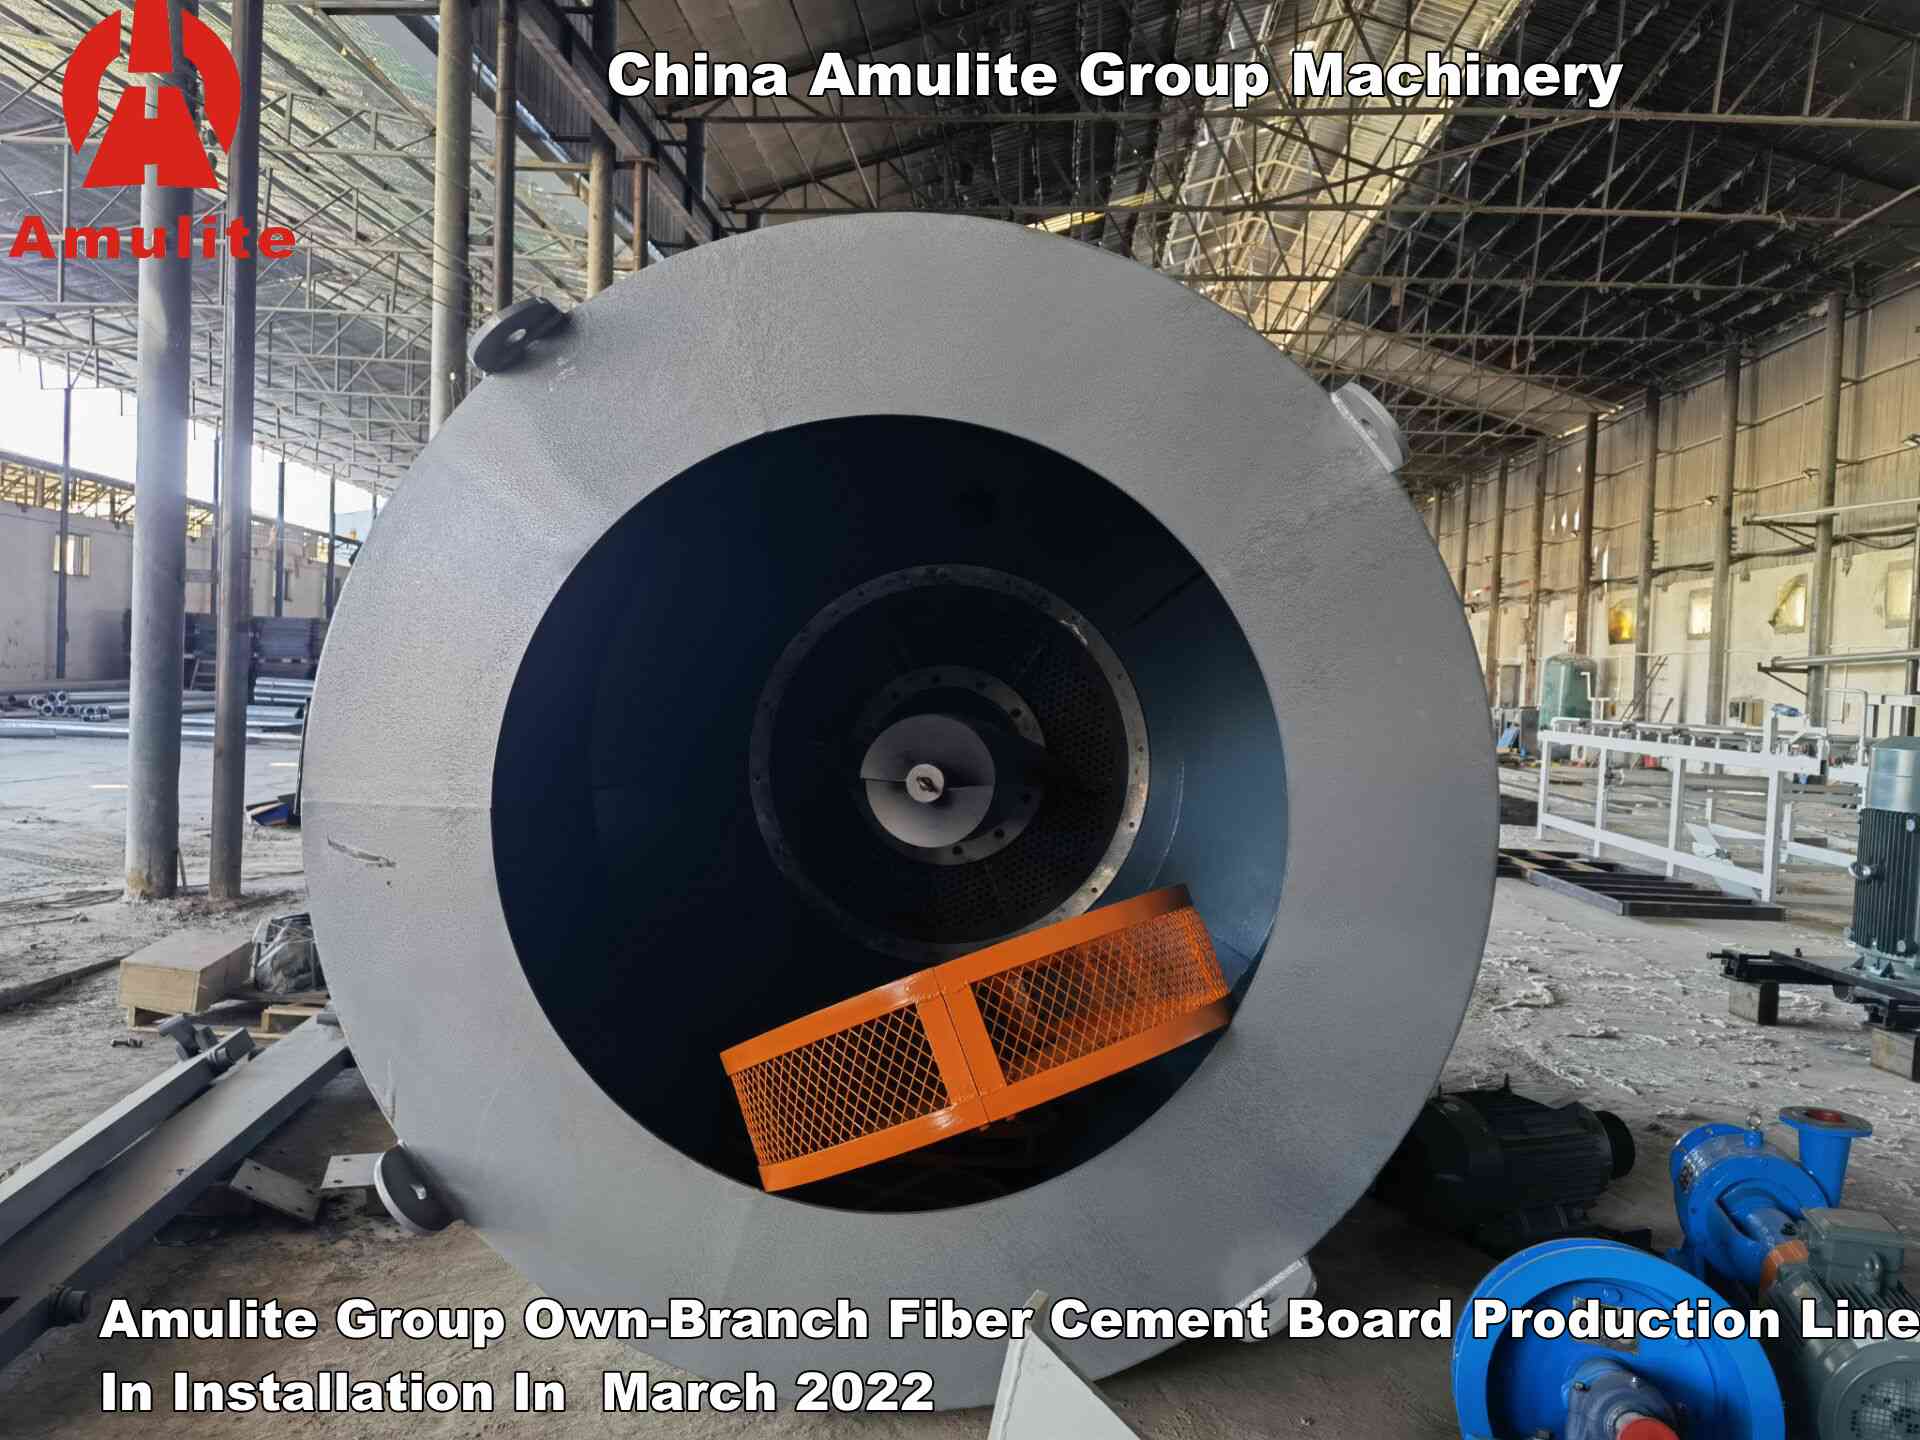 Amulite Group Own-Branch Fiber Cement Board Production Line In Installation In  March 2022 (7)